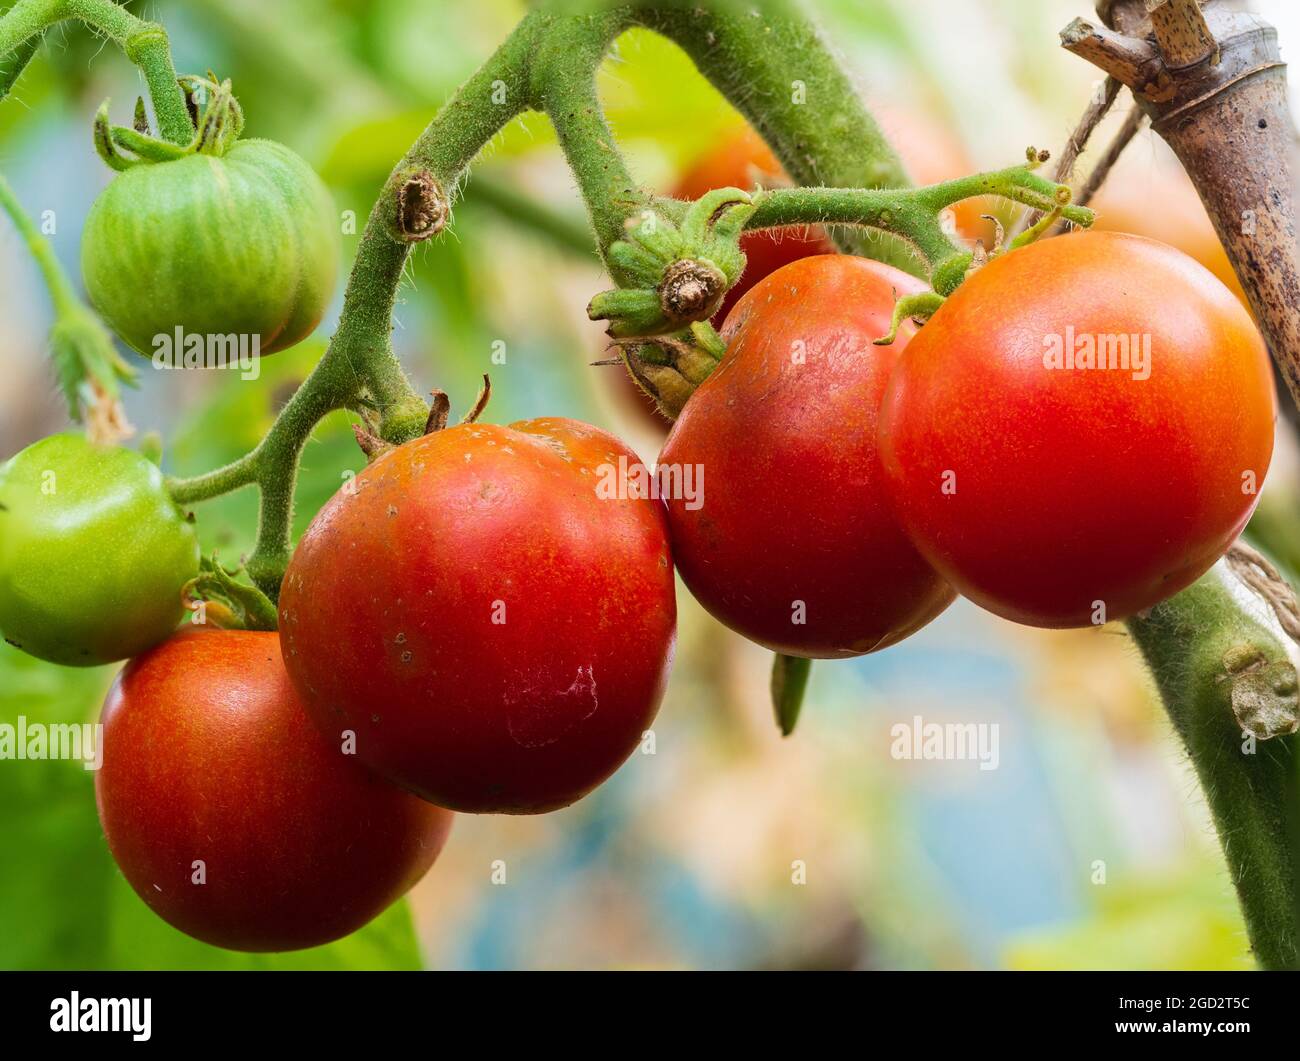 Ripe summer fruits of the tender annual tomato, Solanum lycopersicum 'Outdoor Girl' Stock Photo